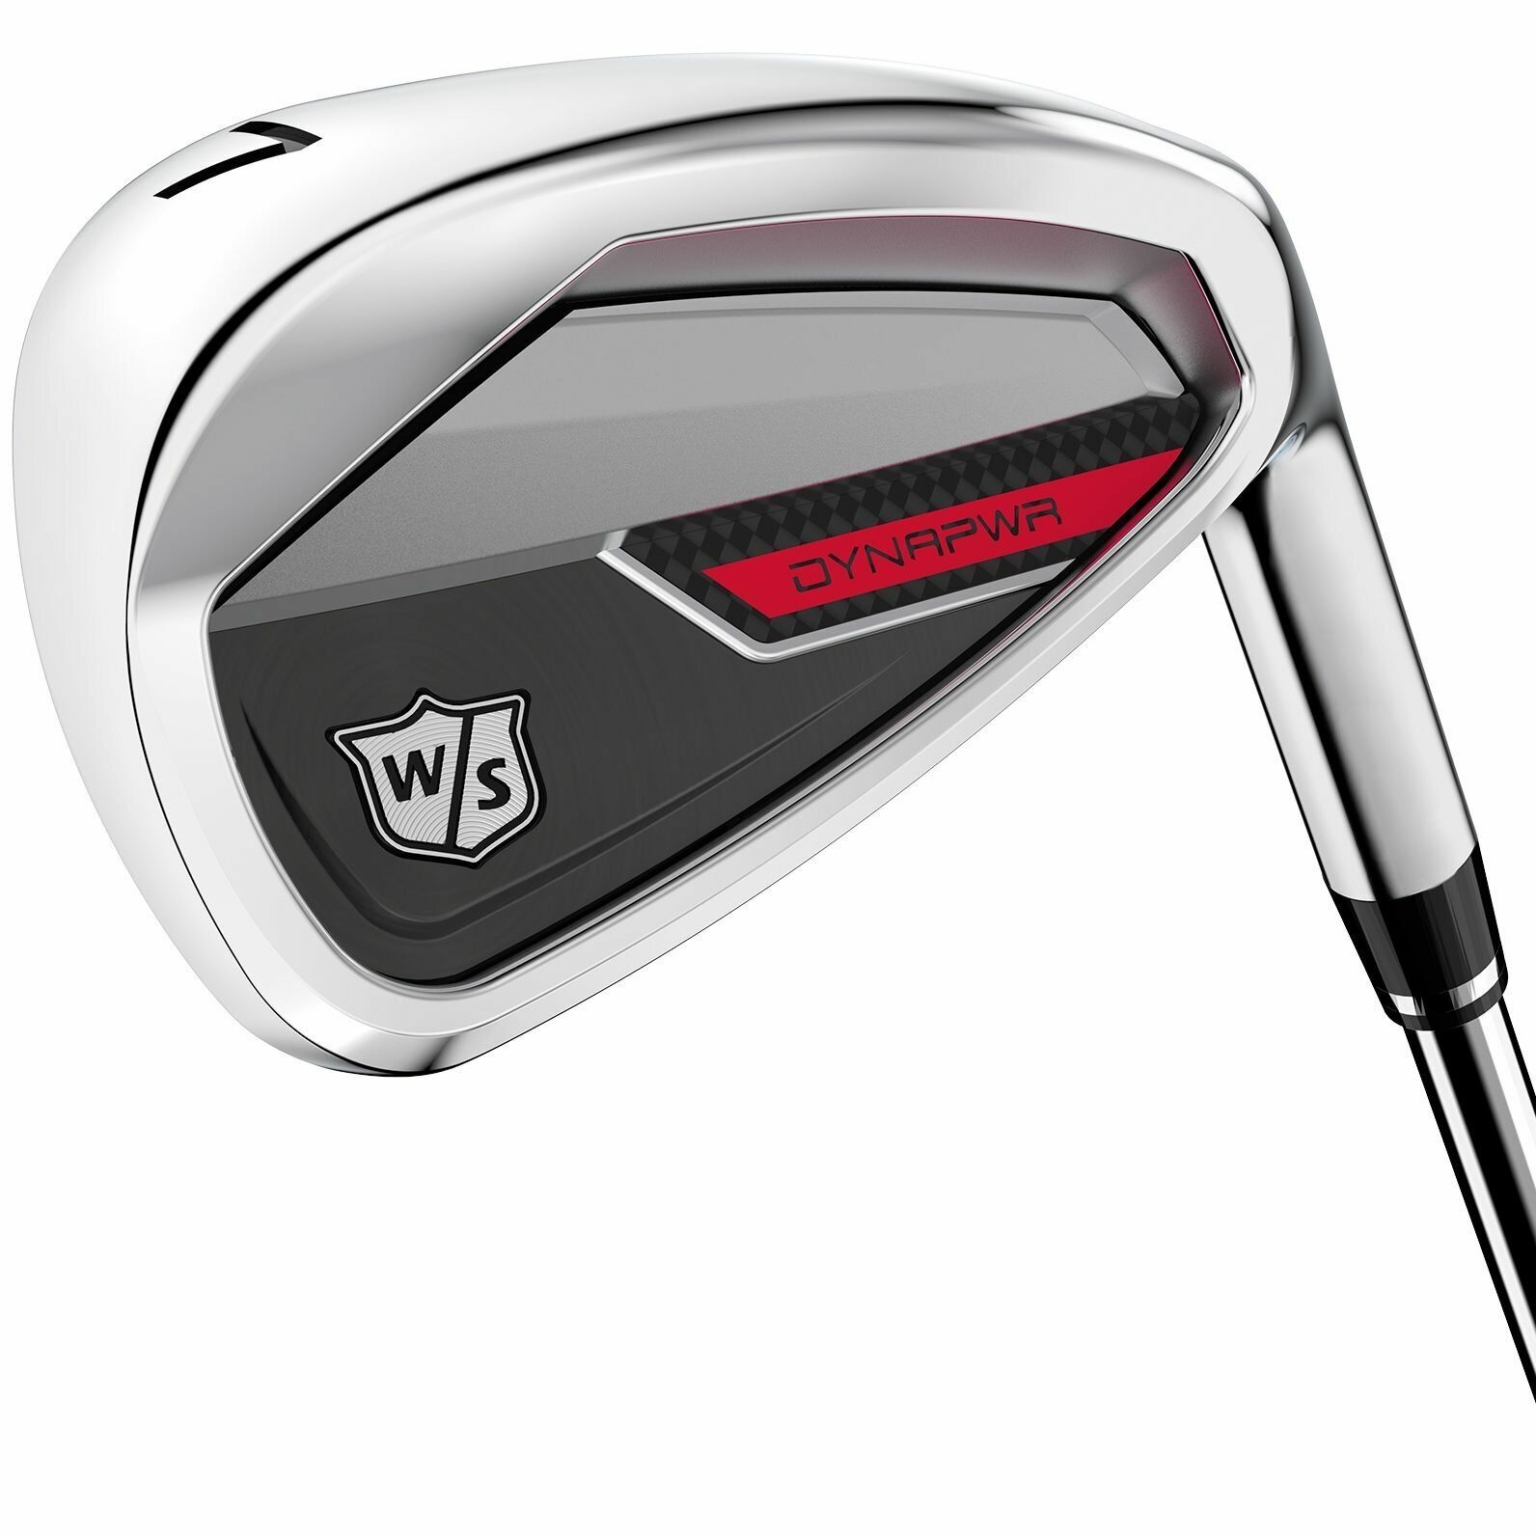 Wilson Dynapower Irons Review And Good For High